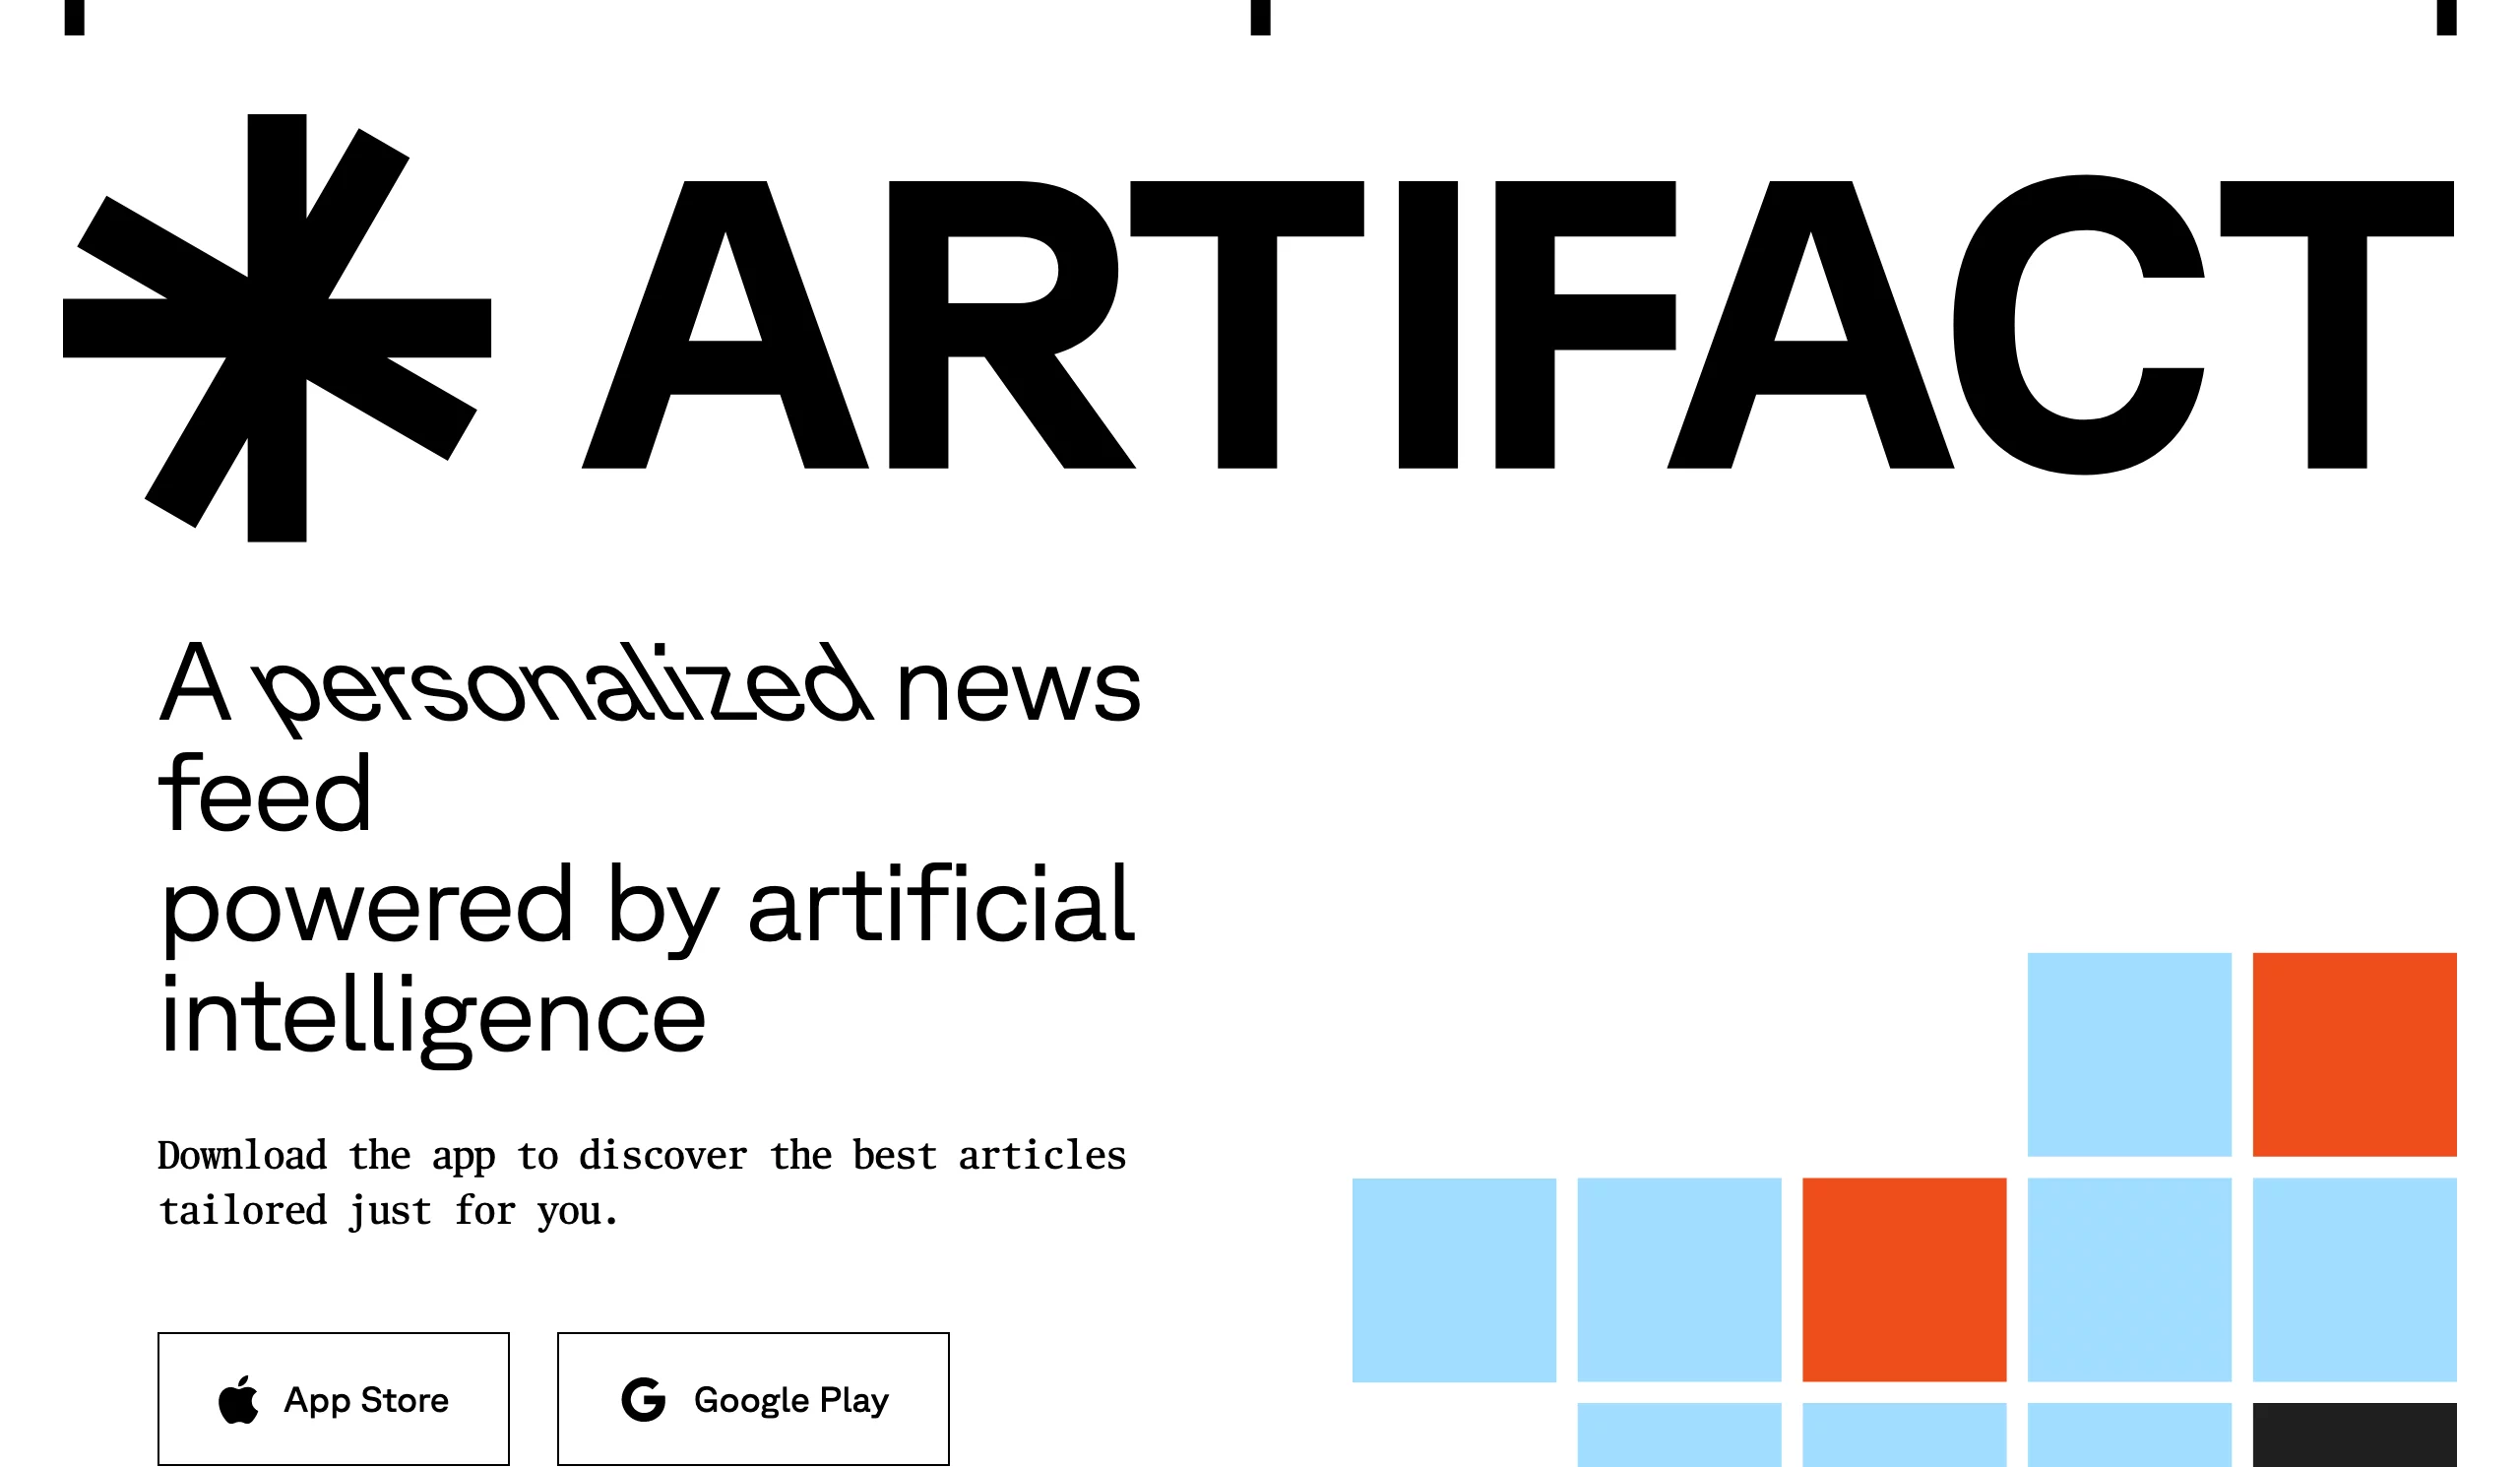  A personalized news feed driven by artificial